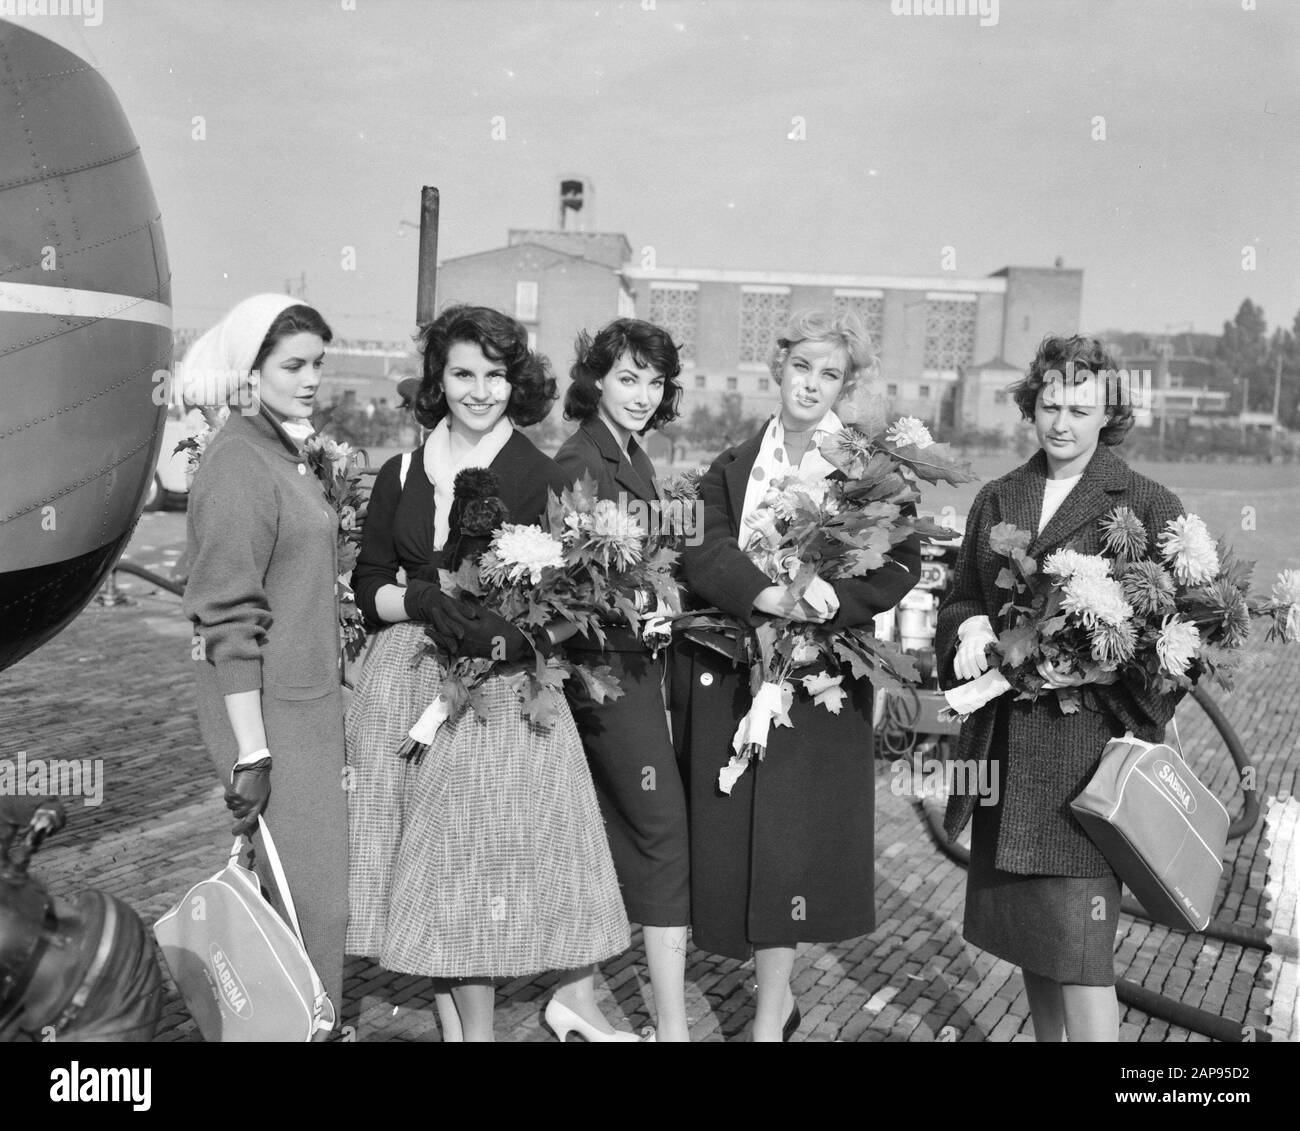 Arrival five beauty queens at Heliport in Rotterdam. From left to right: Miss Iceland, Runa Brynjolfsdottir, Miss France II, Monique Lambert, [FOLLOW TEXT MISSING] Date: 5 October 1957 Location: Rotterdam, Zuid-Holland Keywords: Miss elections, Women Personal name: Brynjolfsdottir, Runa, Lambert, Monique Stock Photo